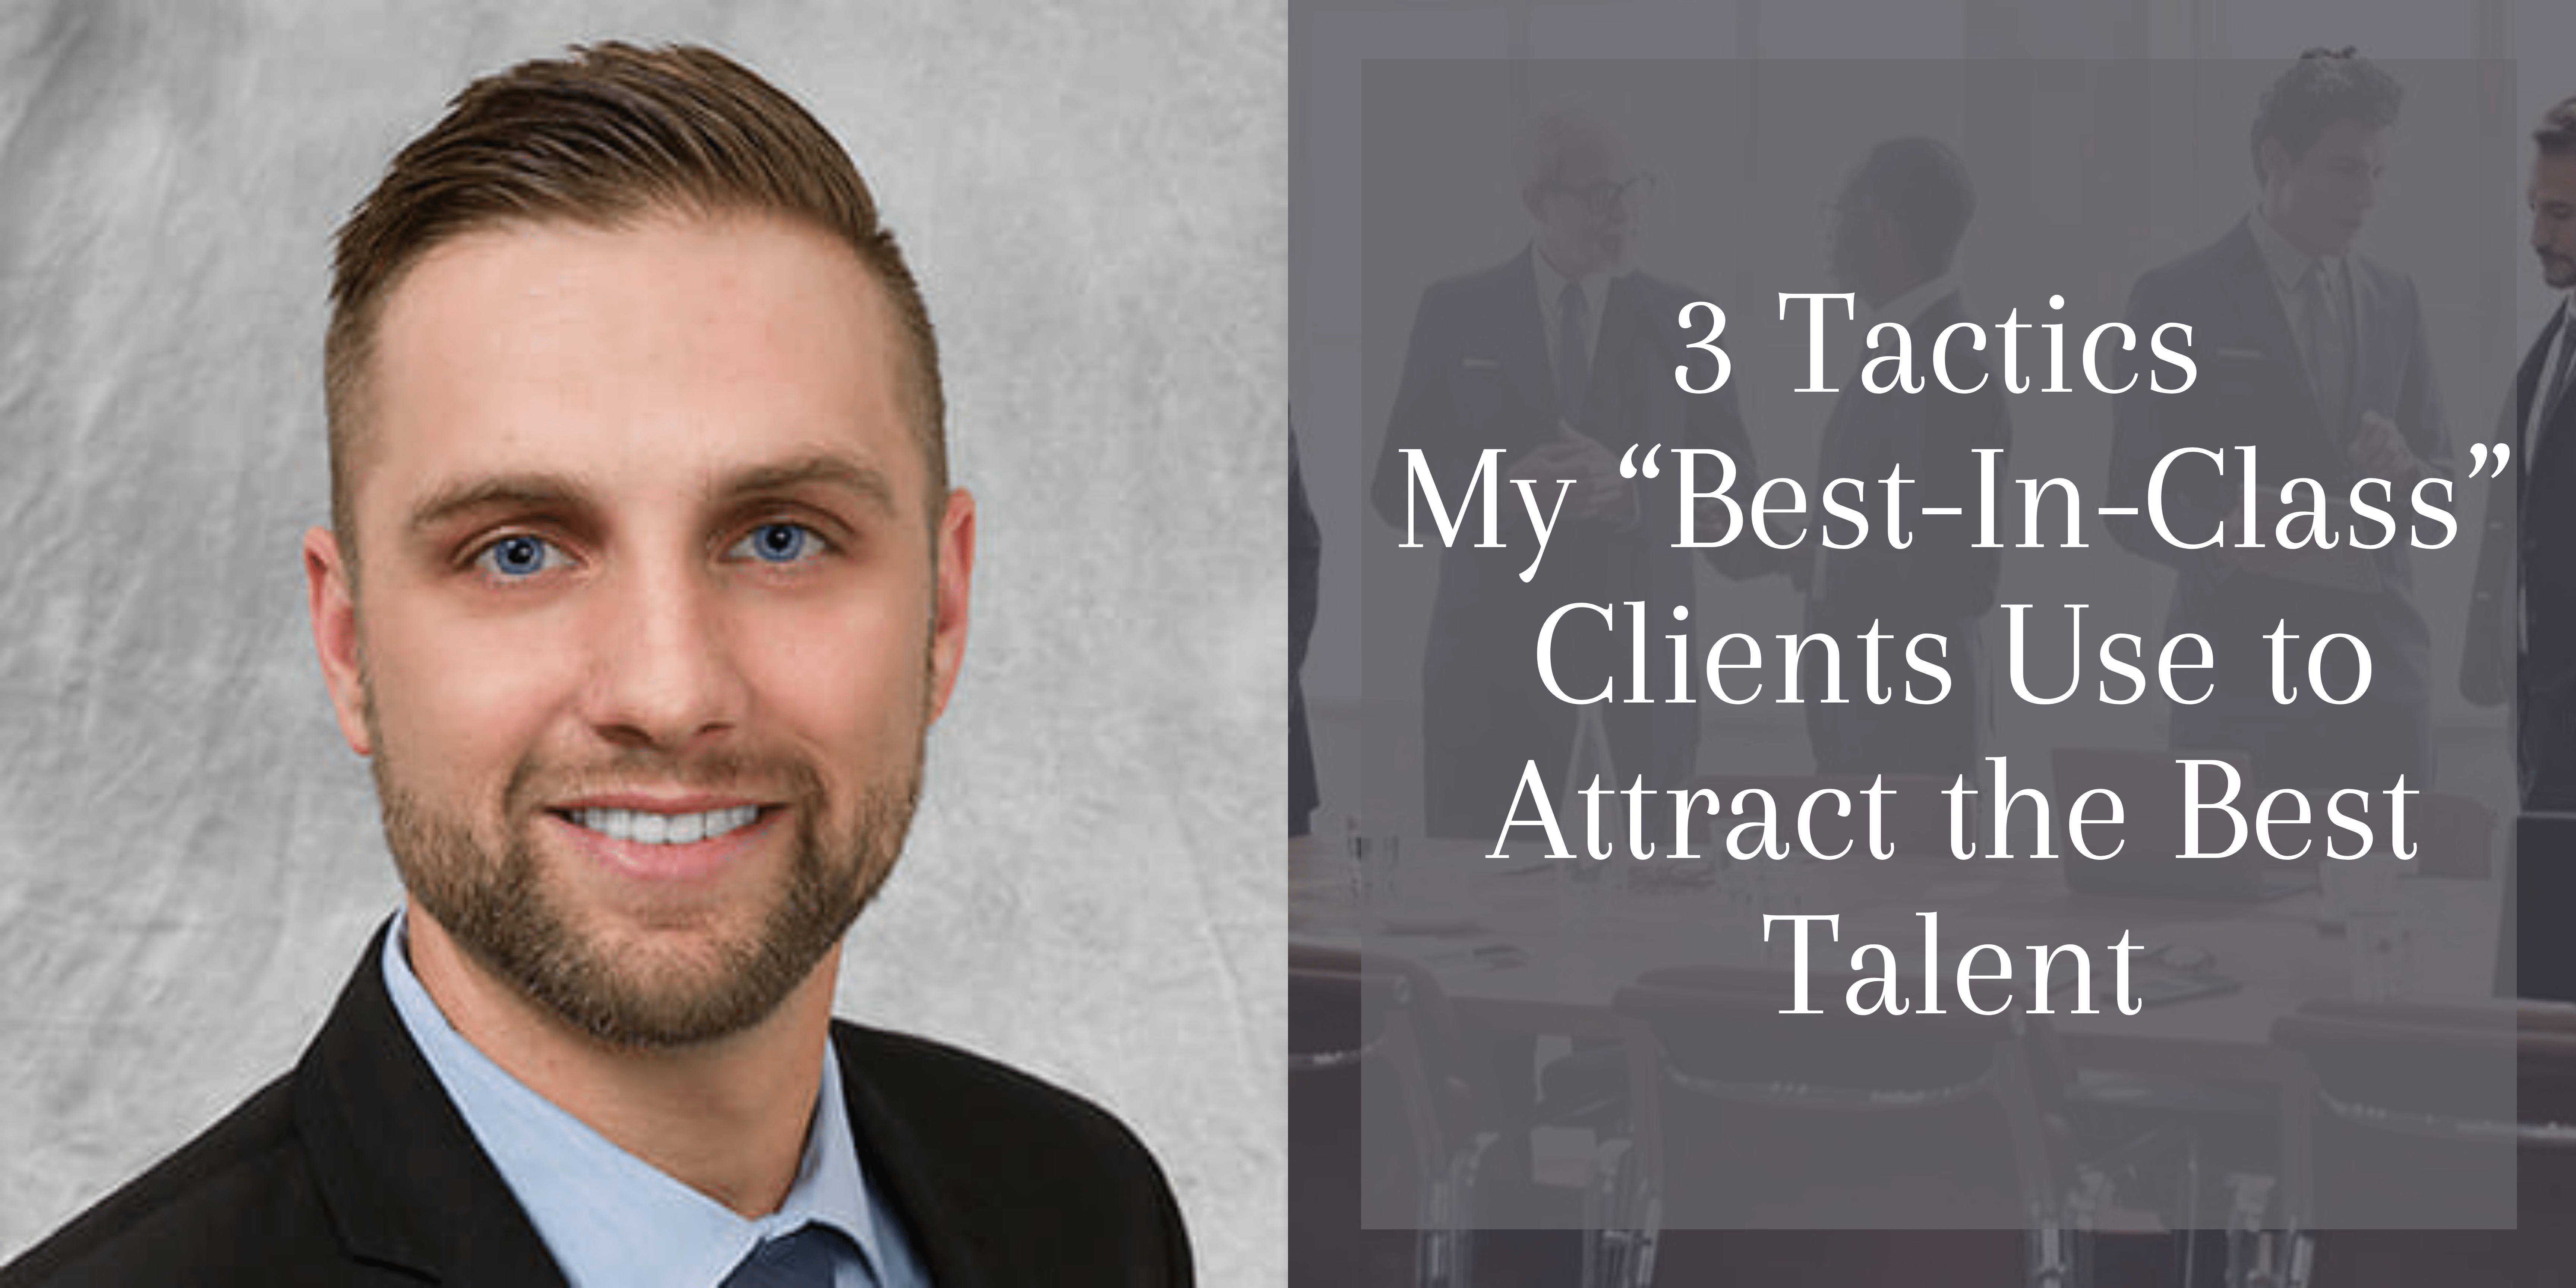 3 Tactics My “Best-In-Class” Clients Use to Attract the Best Talent